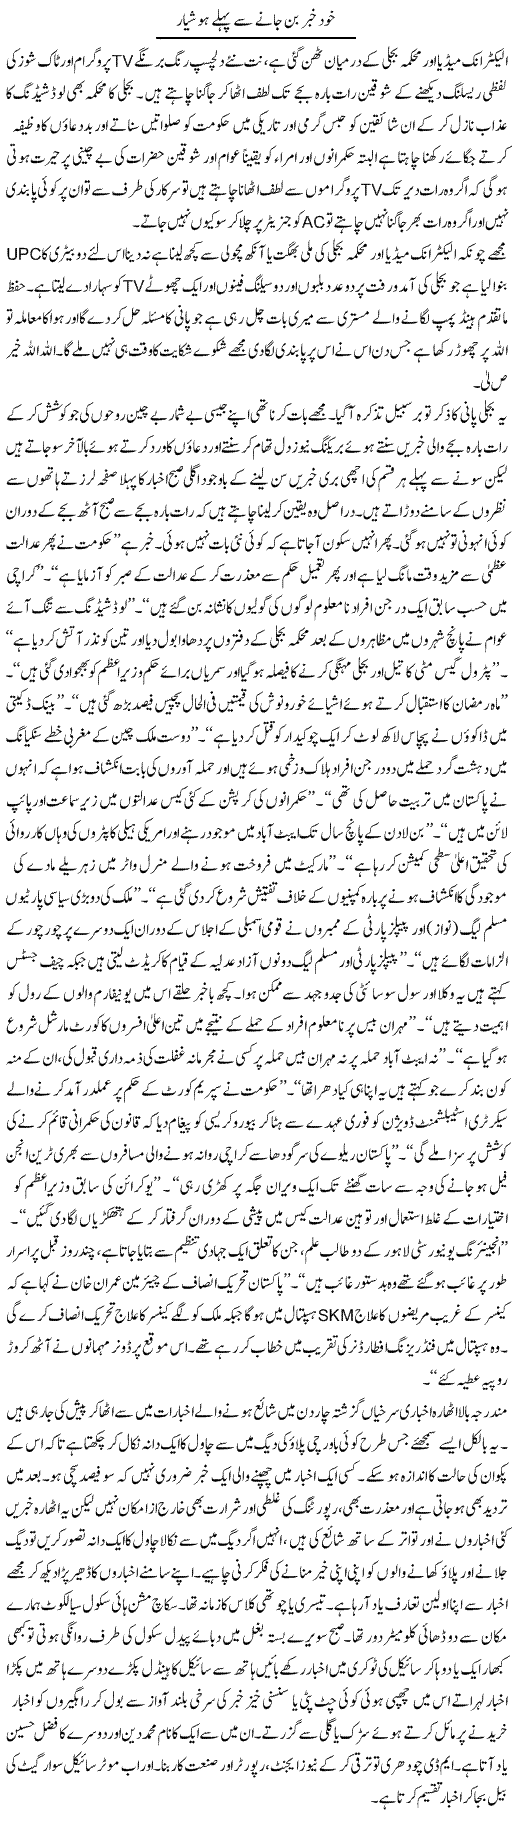 Circus in Pakistan Express Column Hameed Ahmed 7 August 2011